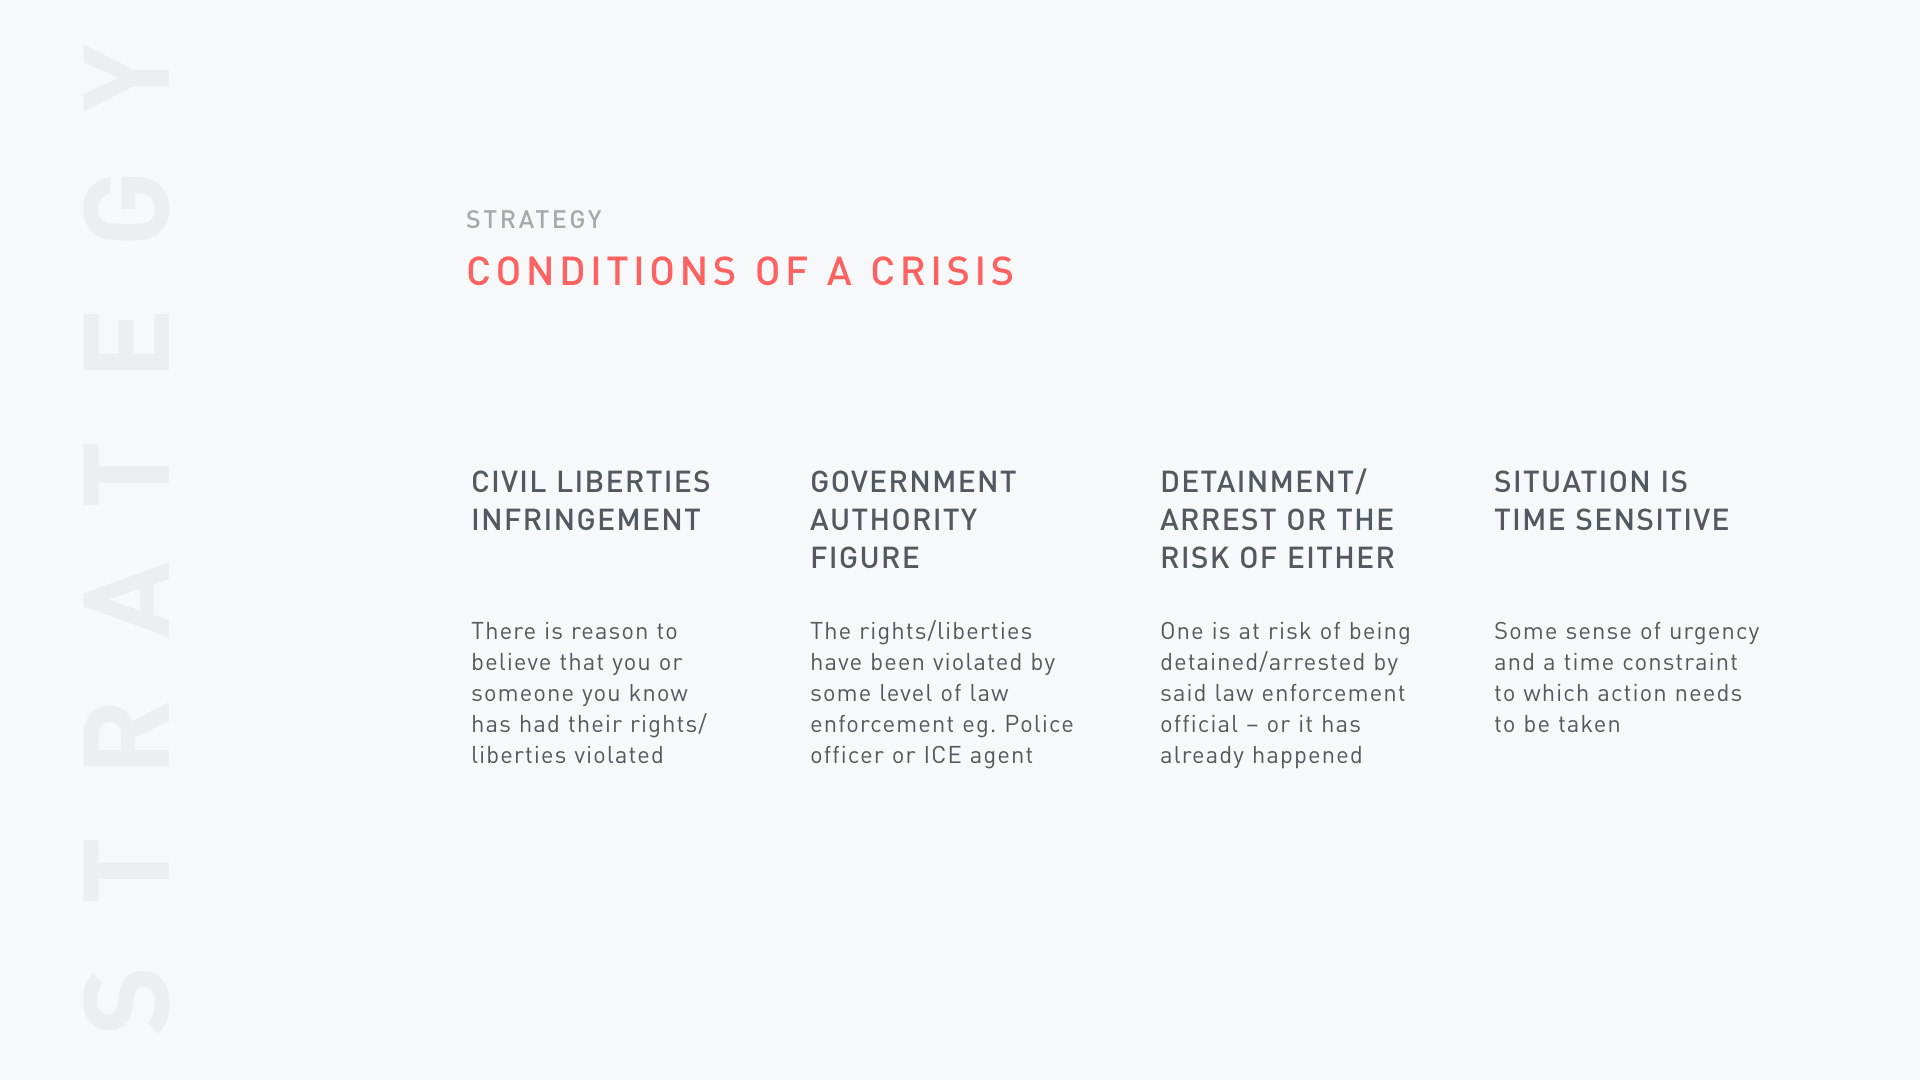 ACLU Conditions of a Crisis